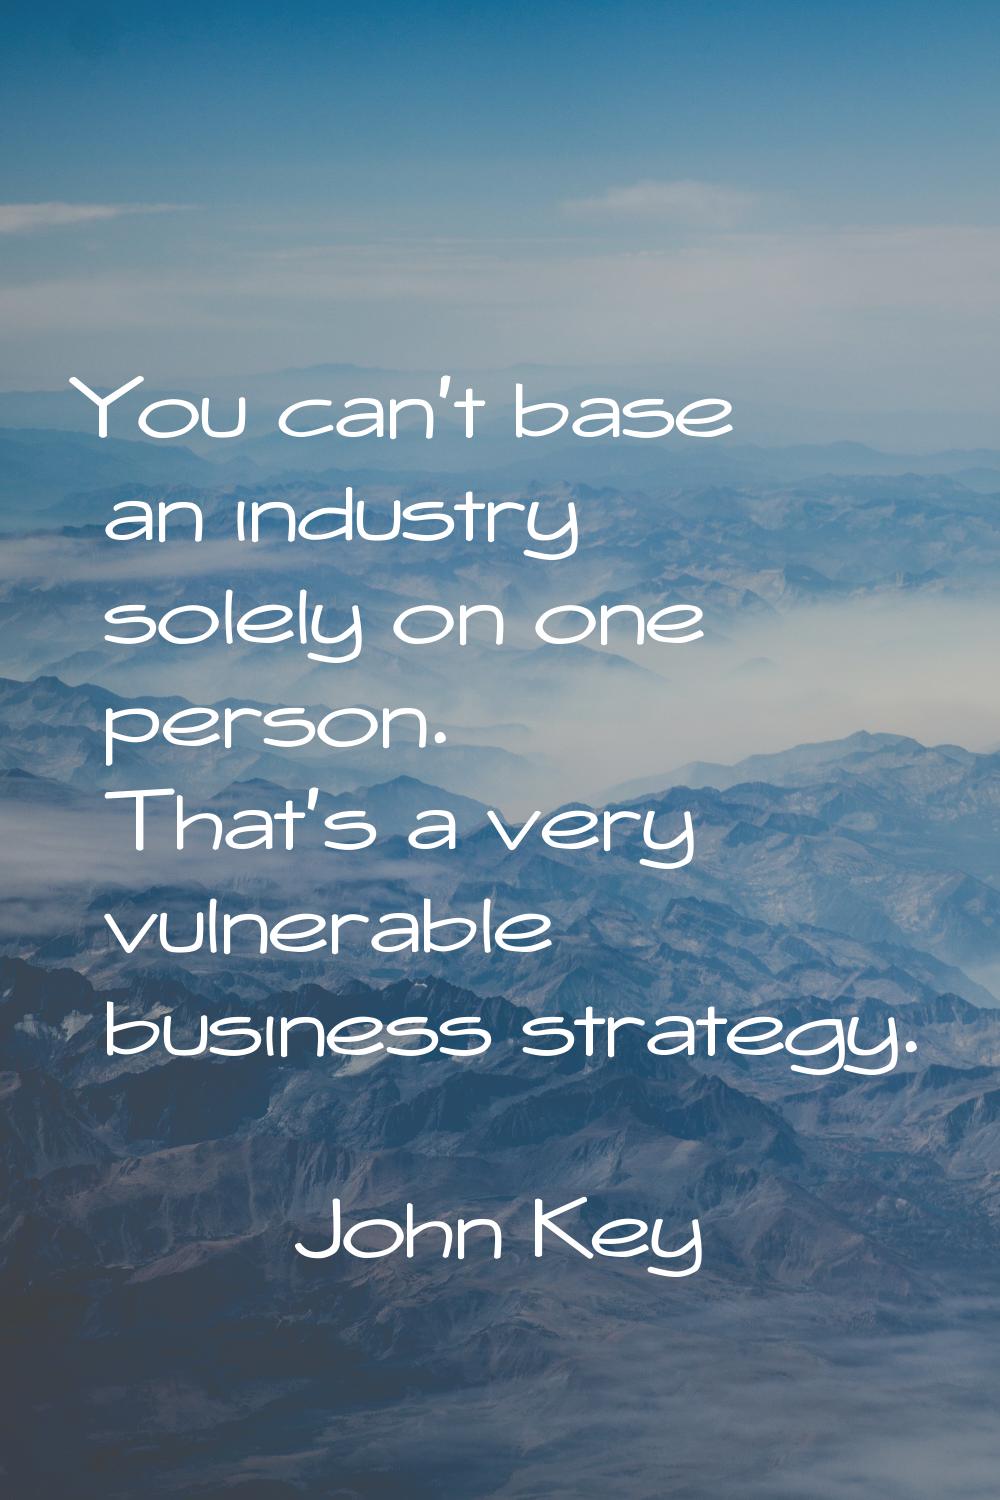 You can't base an industry solely on one person. That's a very vulnerable business strategy.